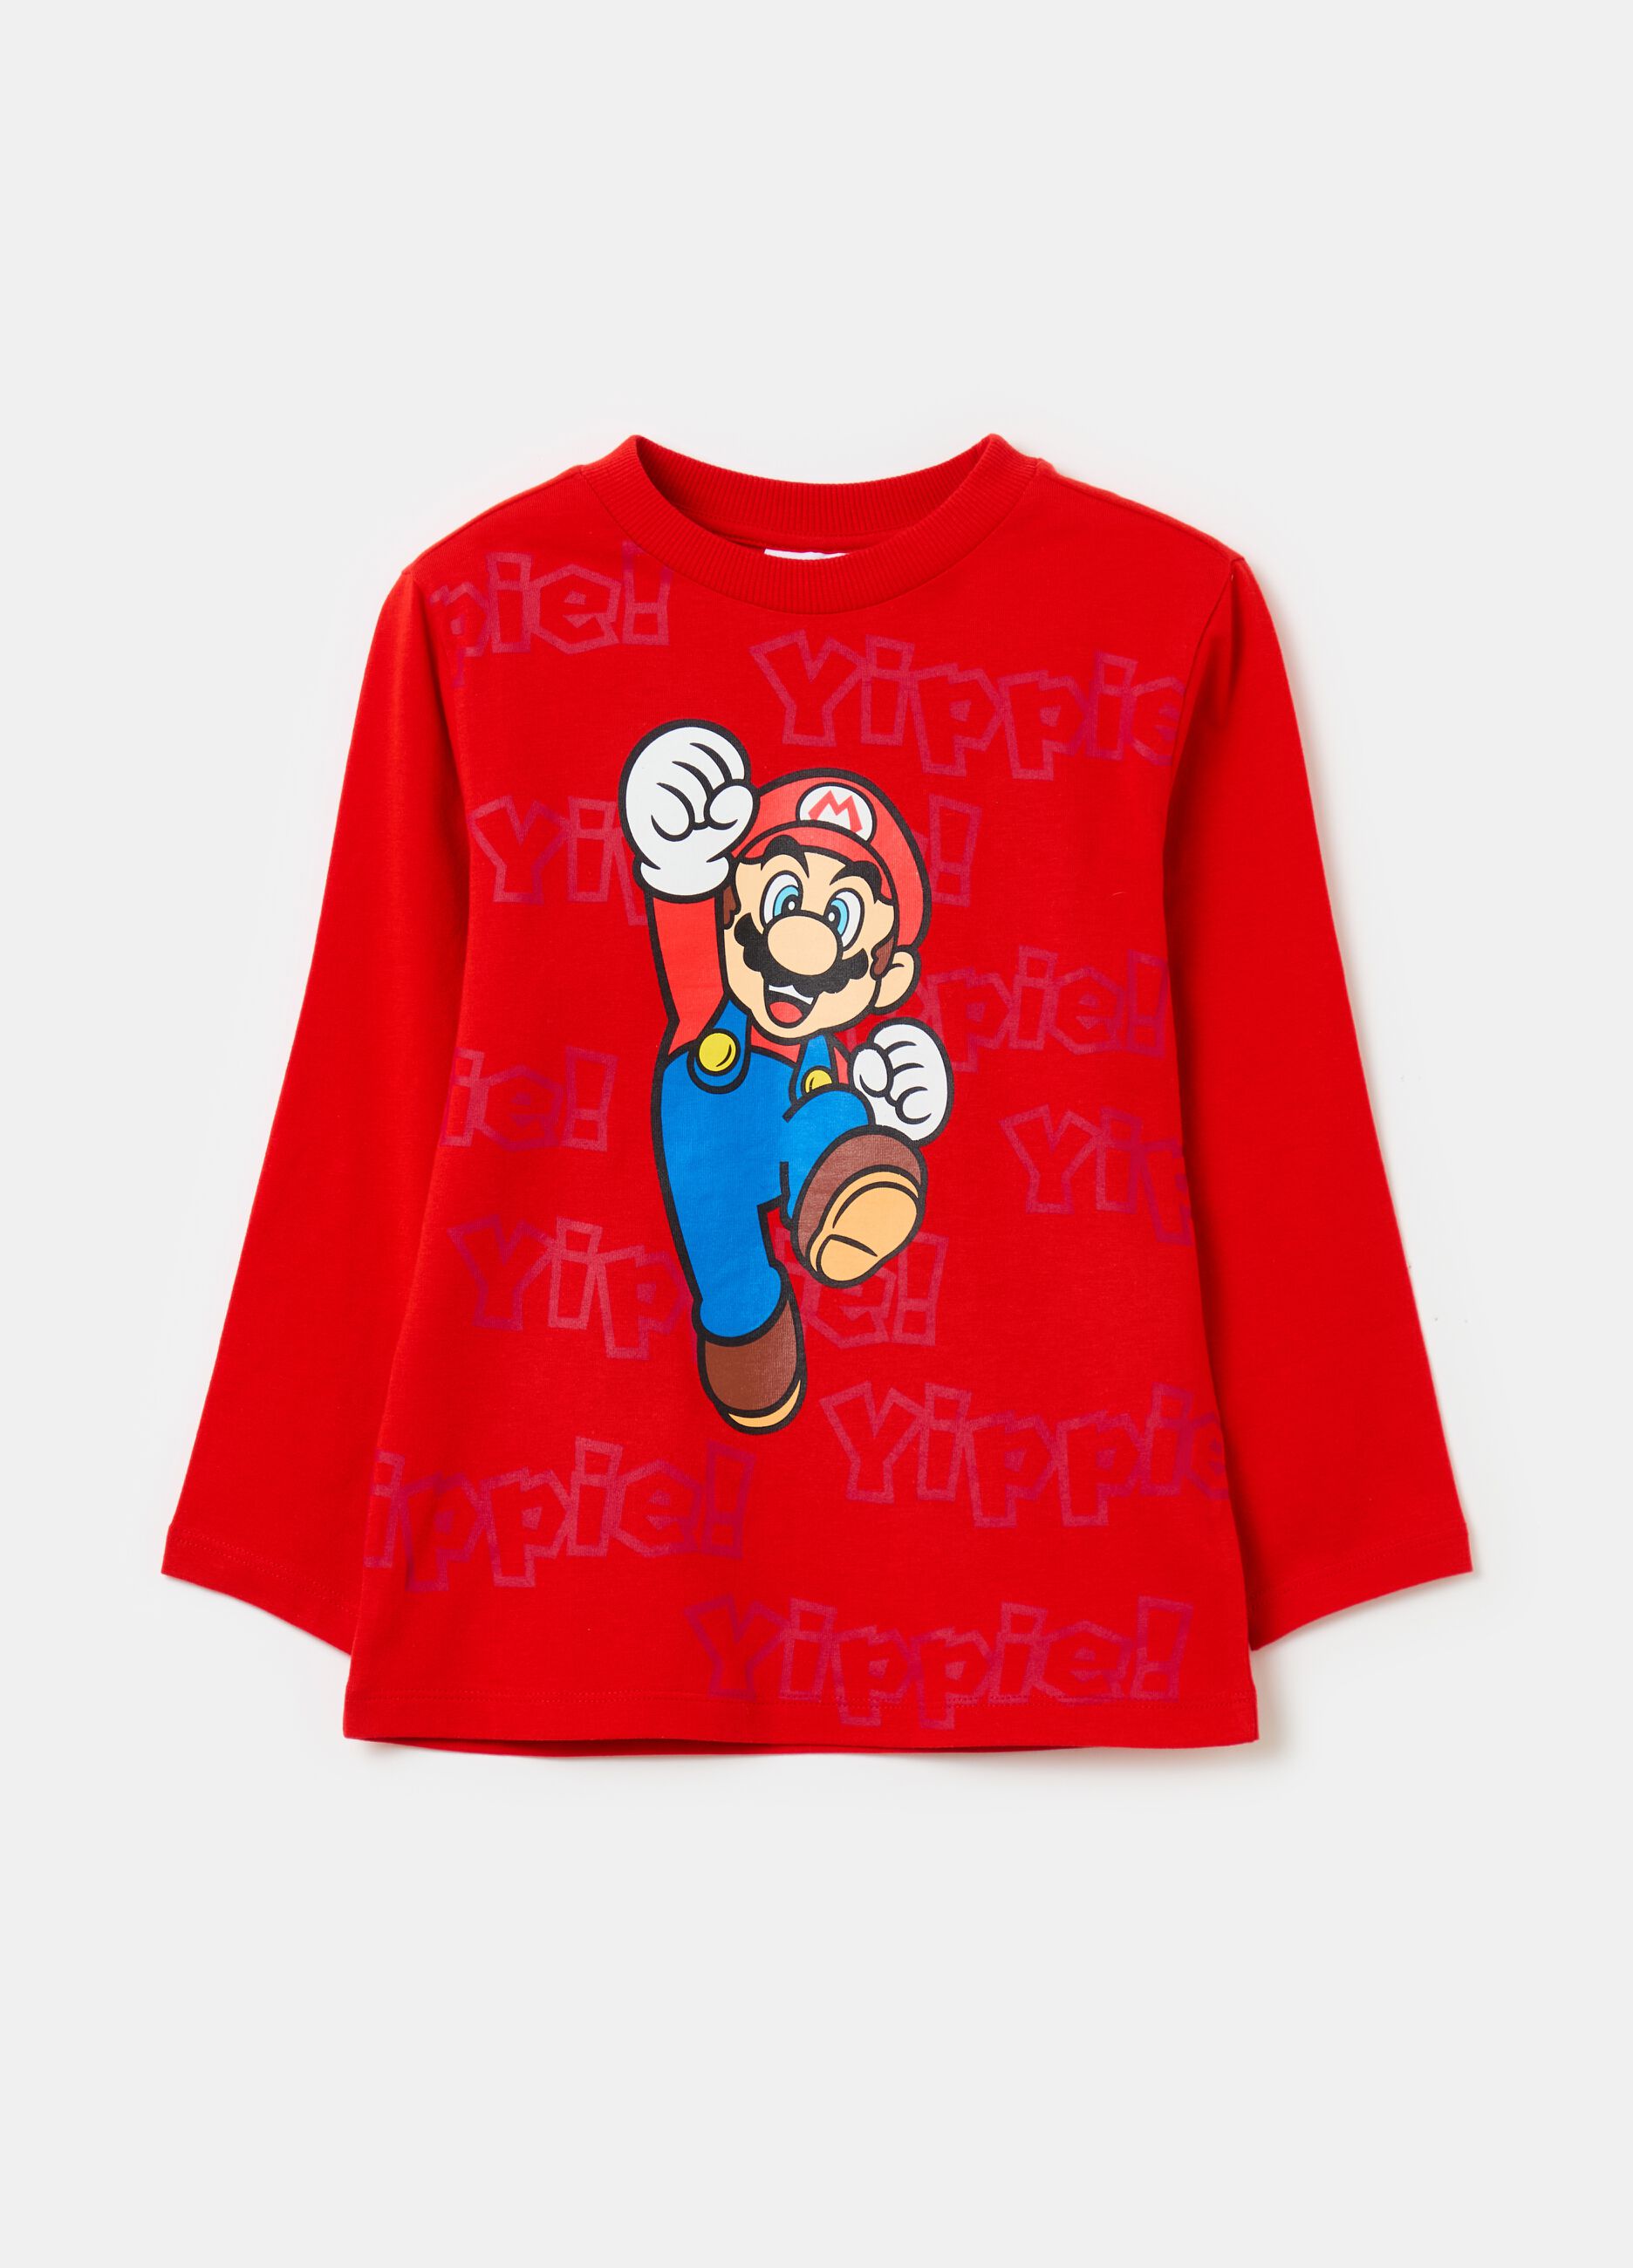 Super Mario™ T-shirt with long sleeves